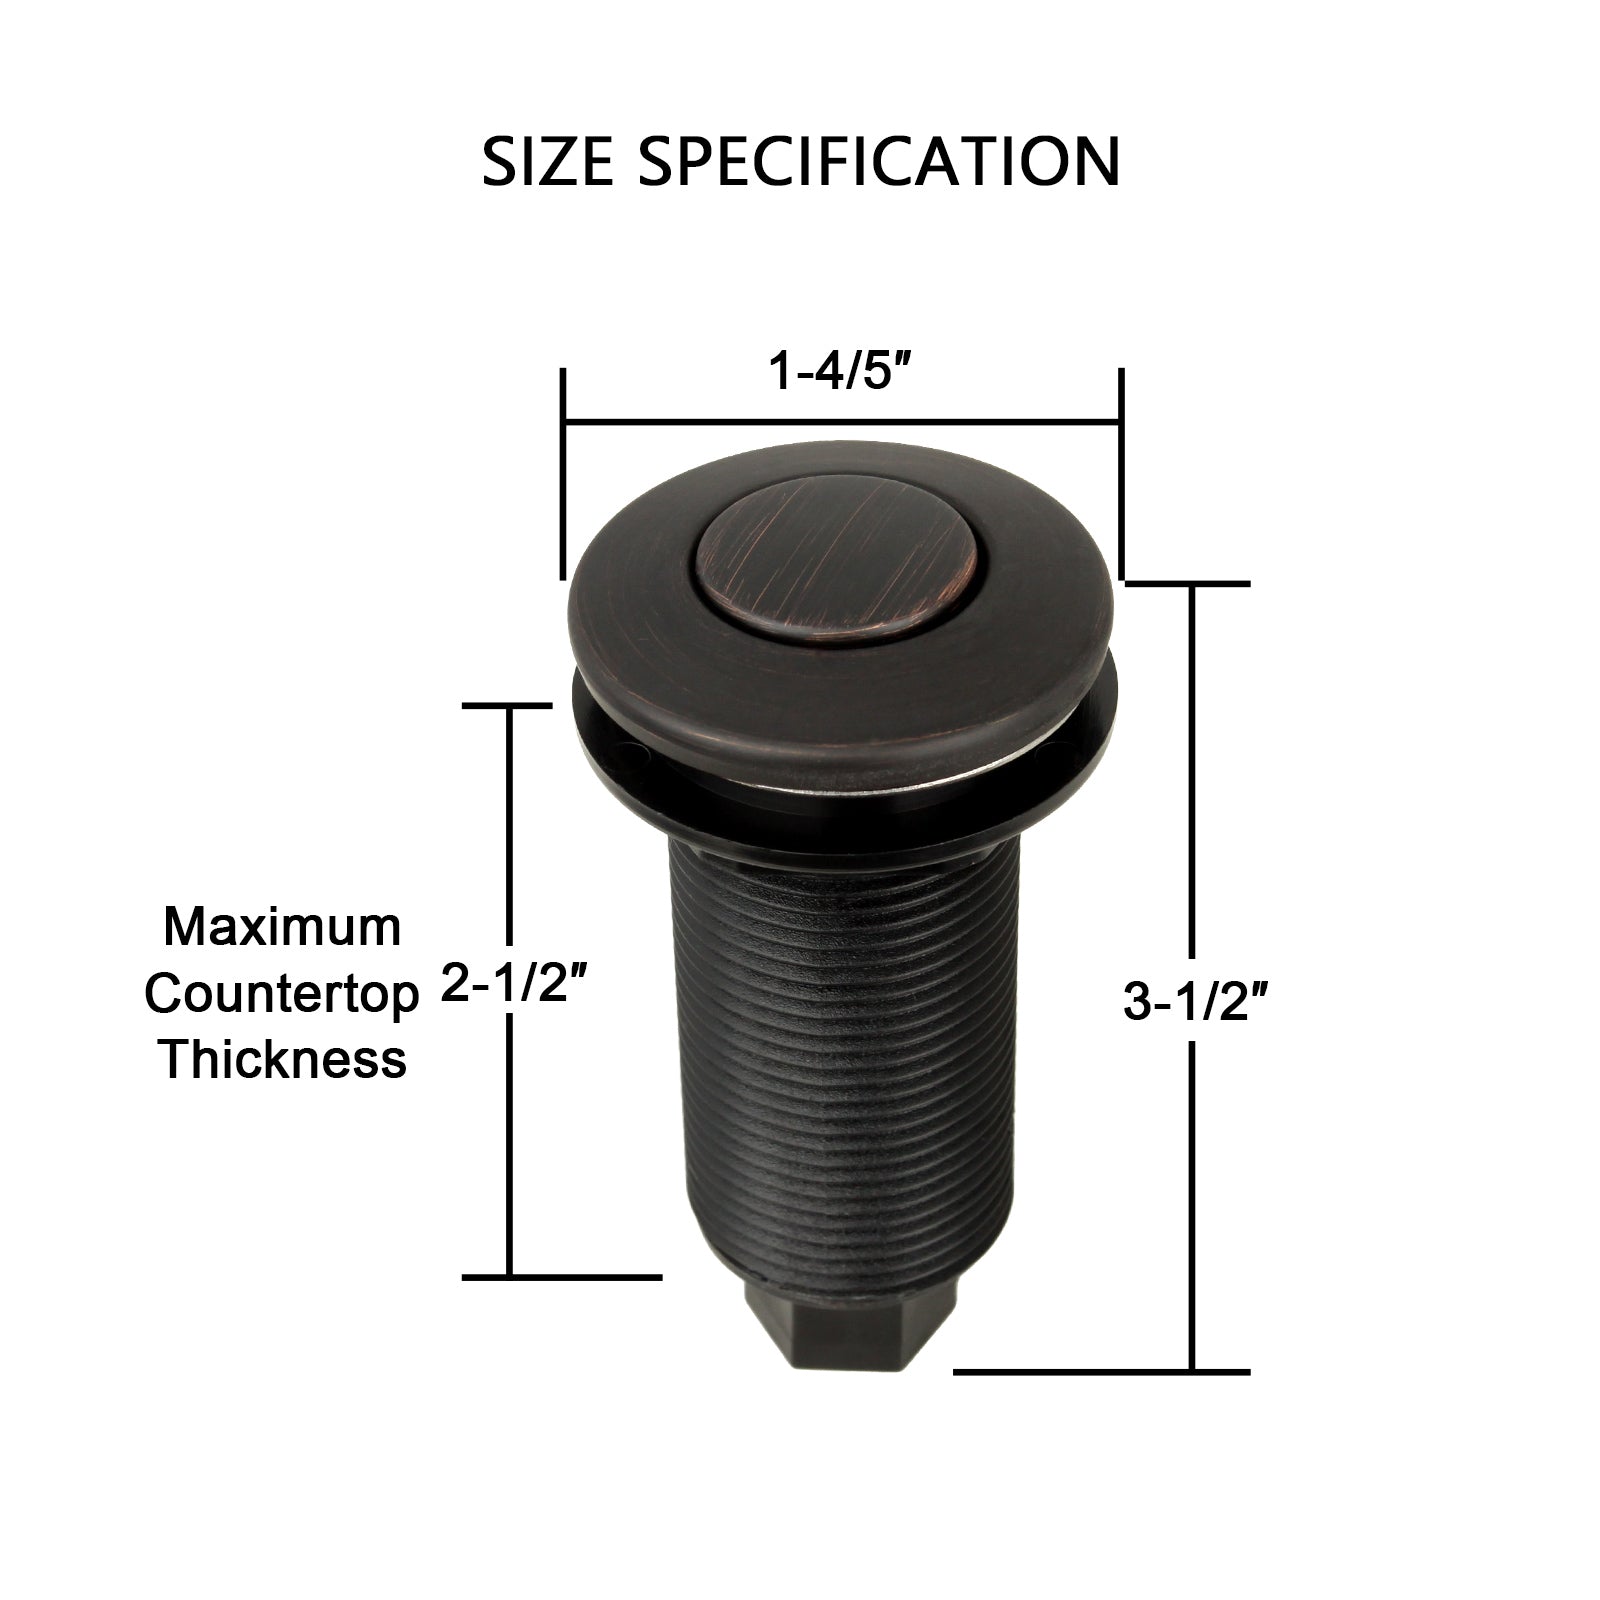 Oil Rubbed Bronze Garbage Disposal Air Switch with Air Hose - AK79001-ORB